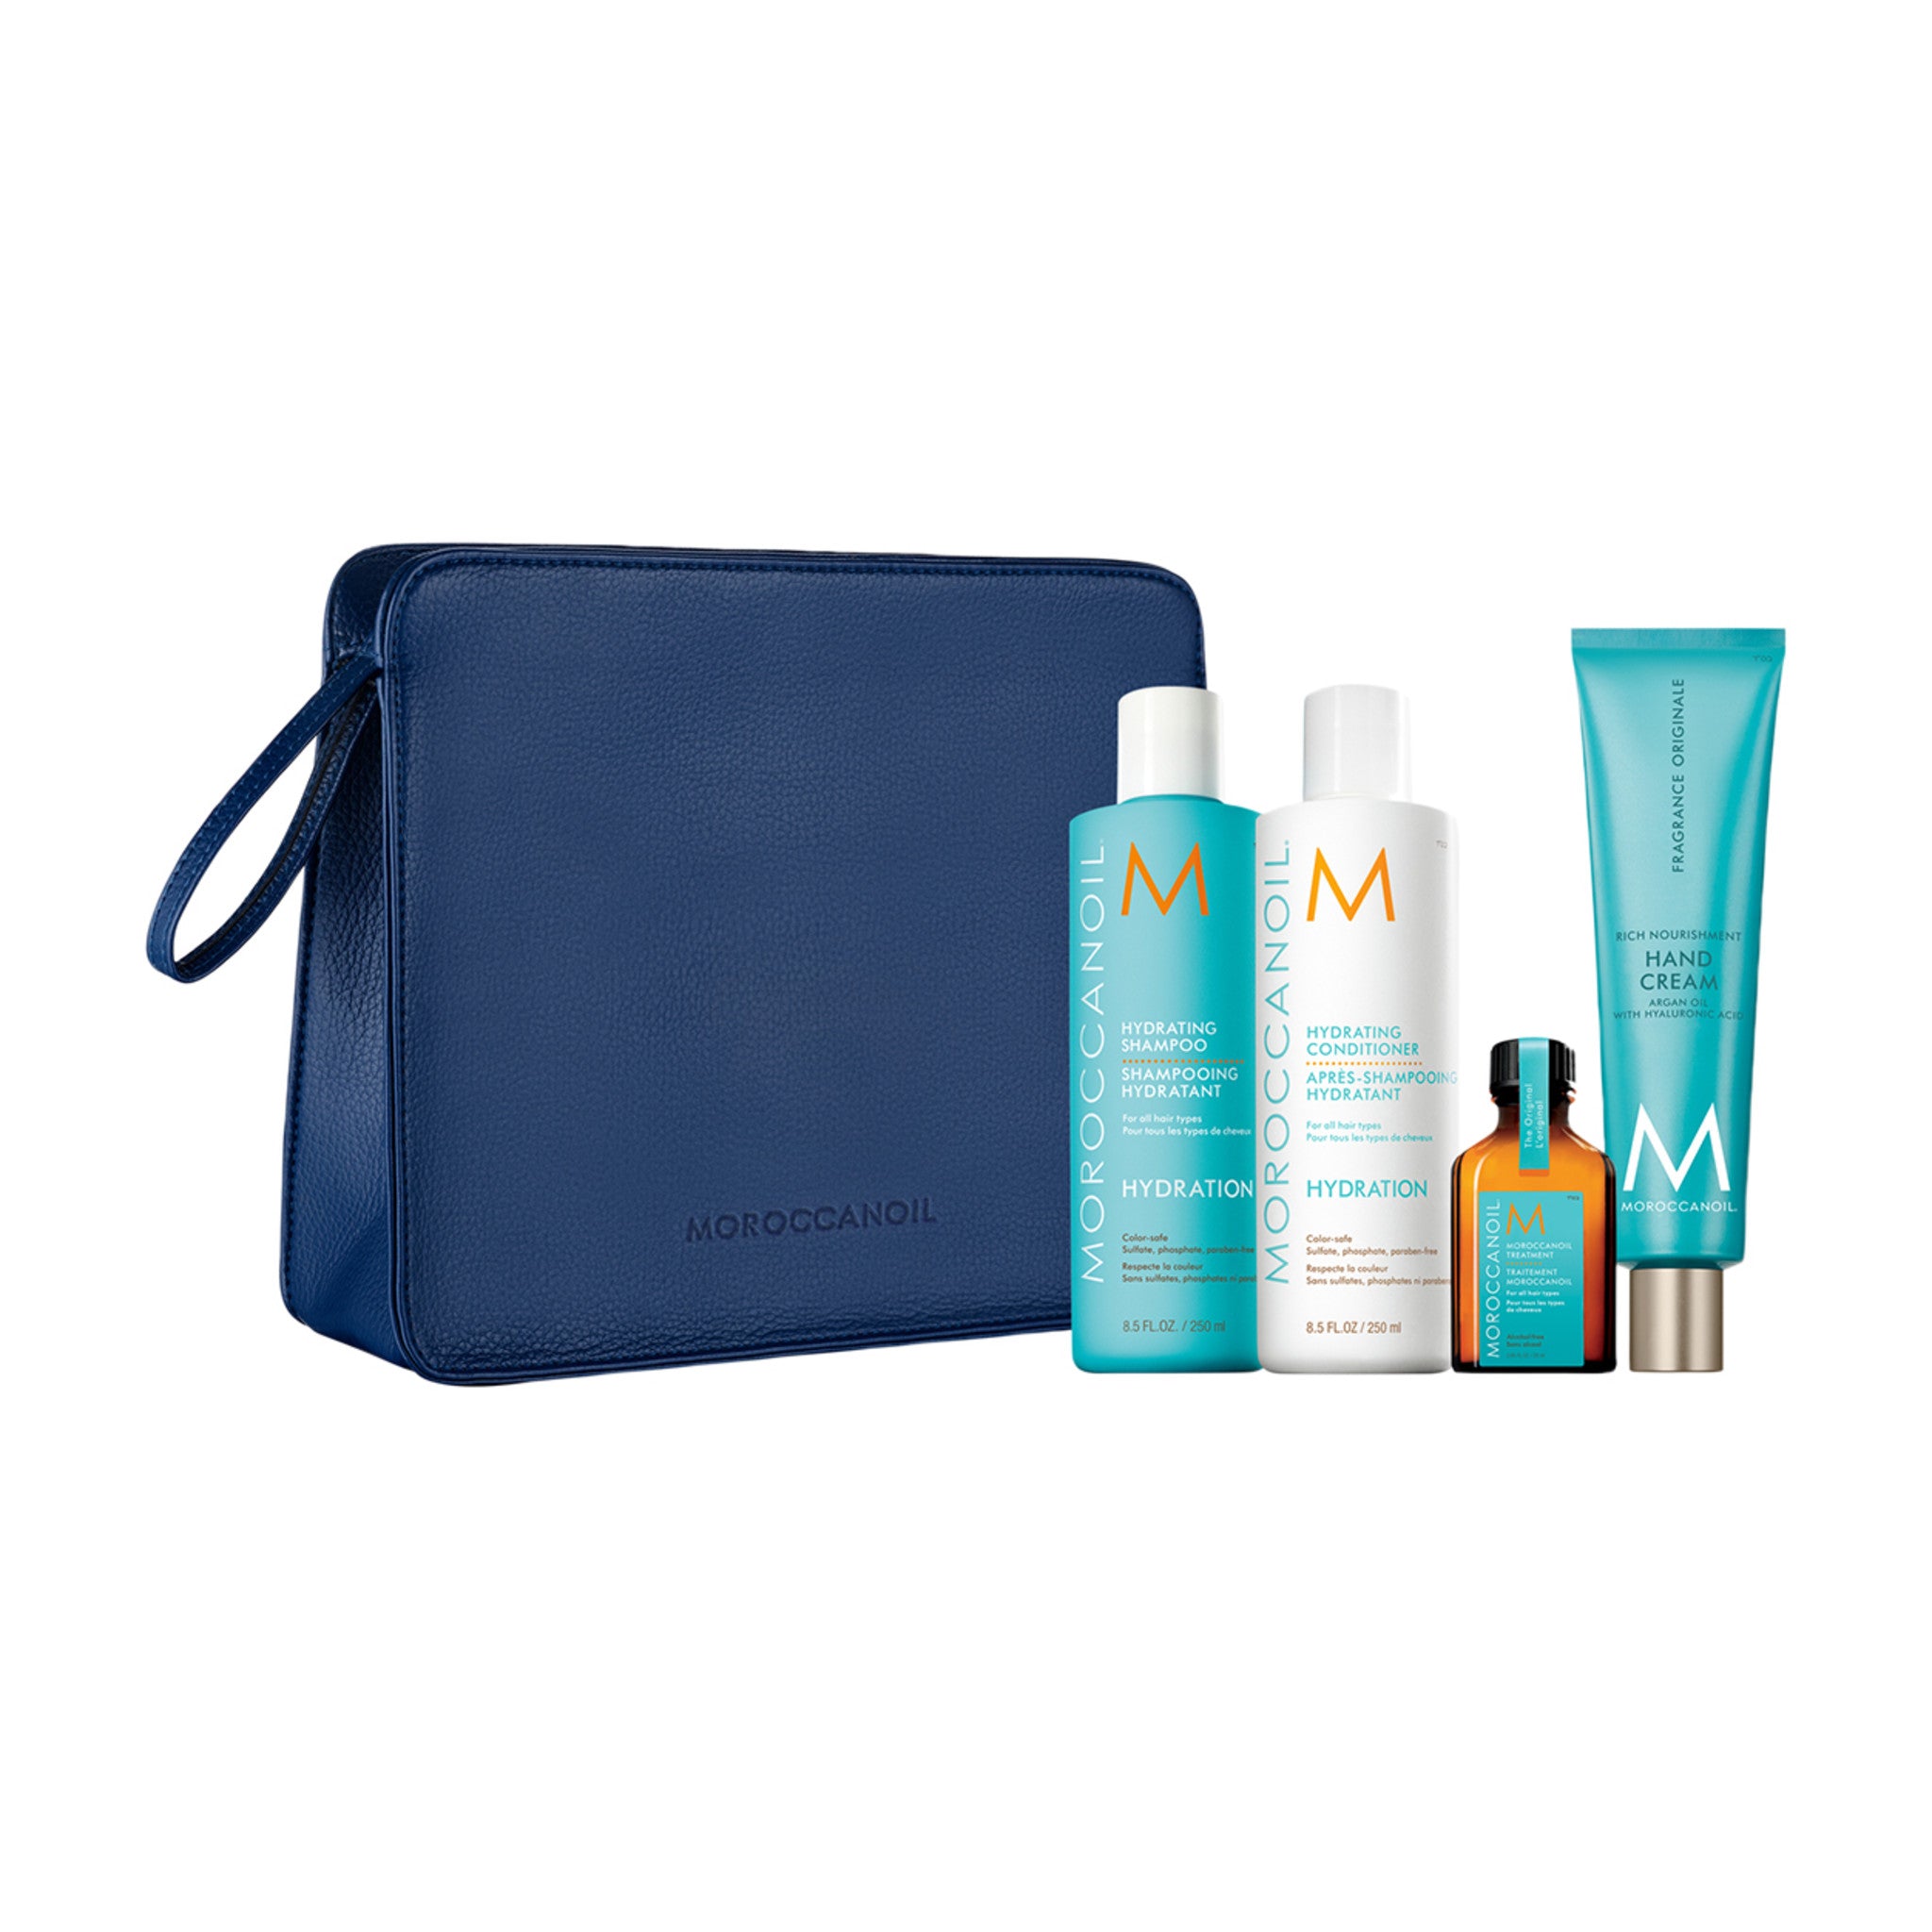 Moroccanoil Hydration Gift Set (Limited Edition) main image.